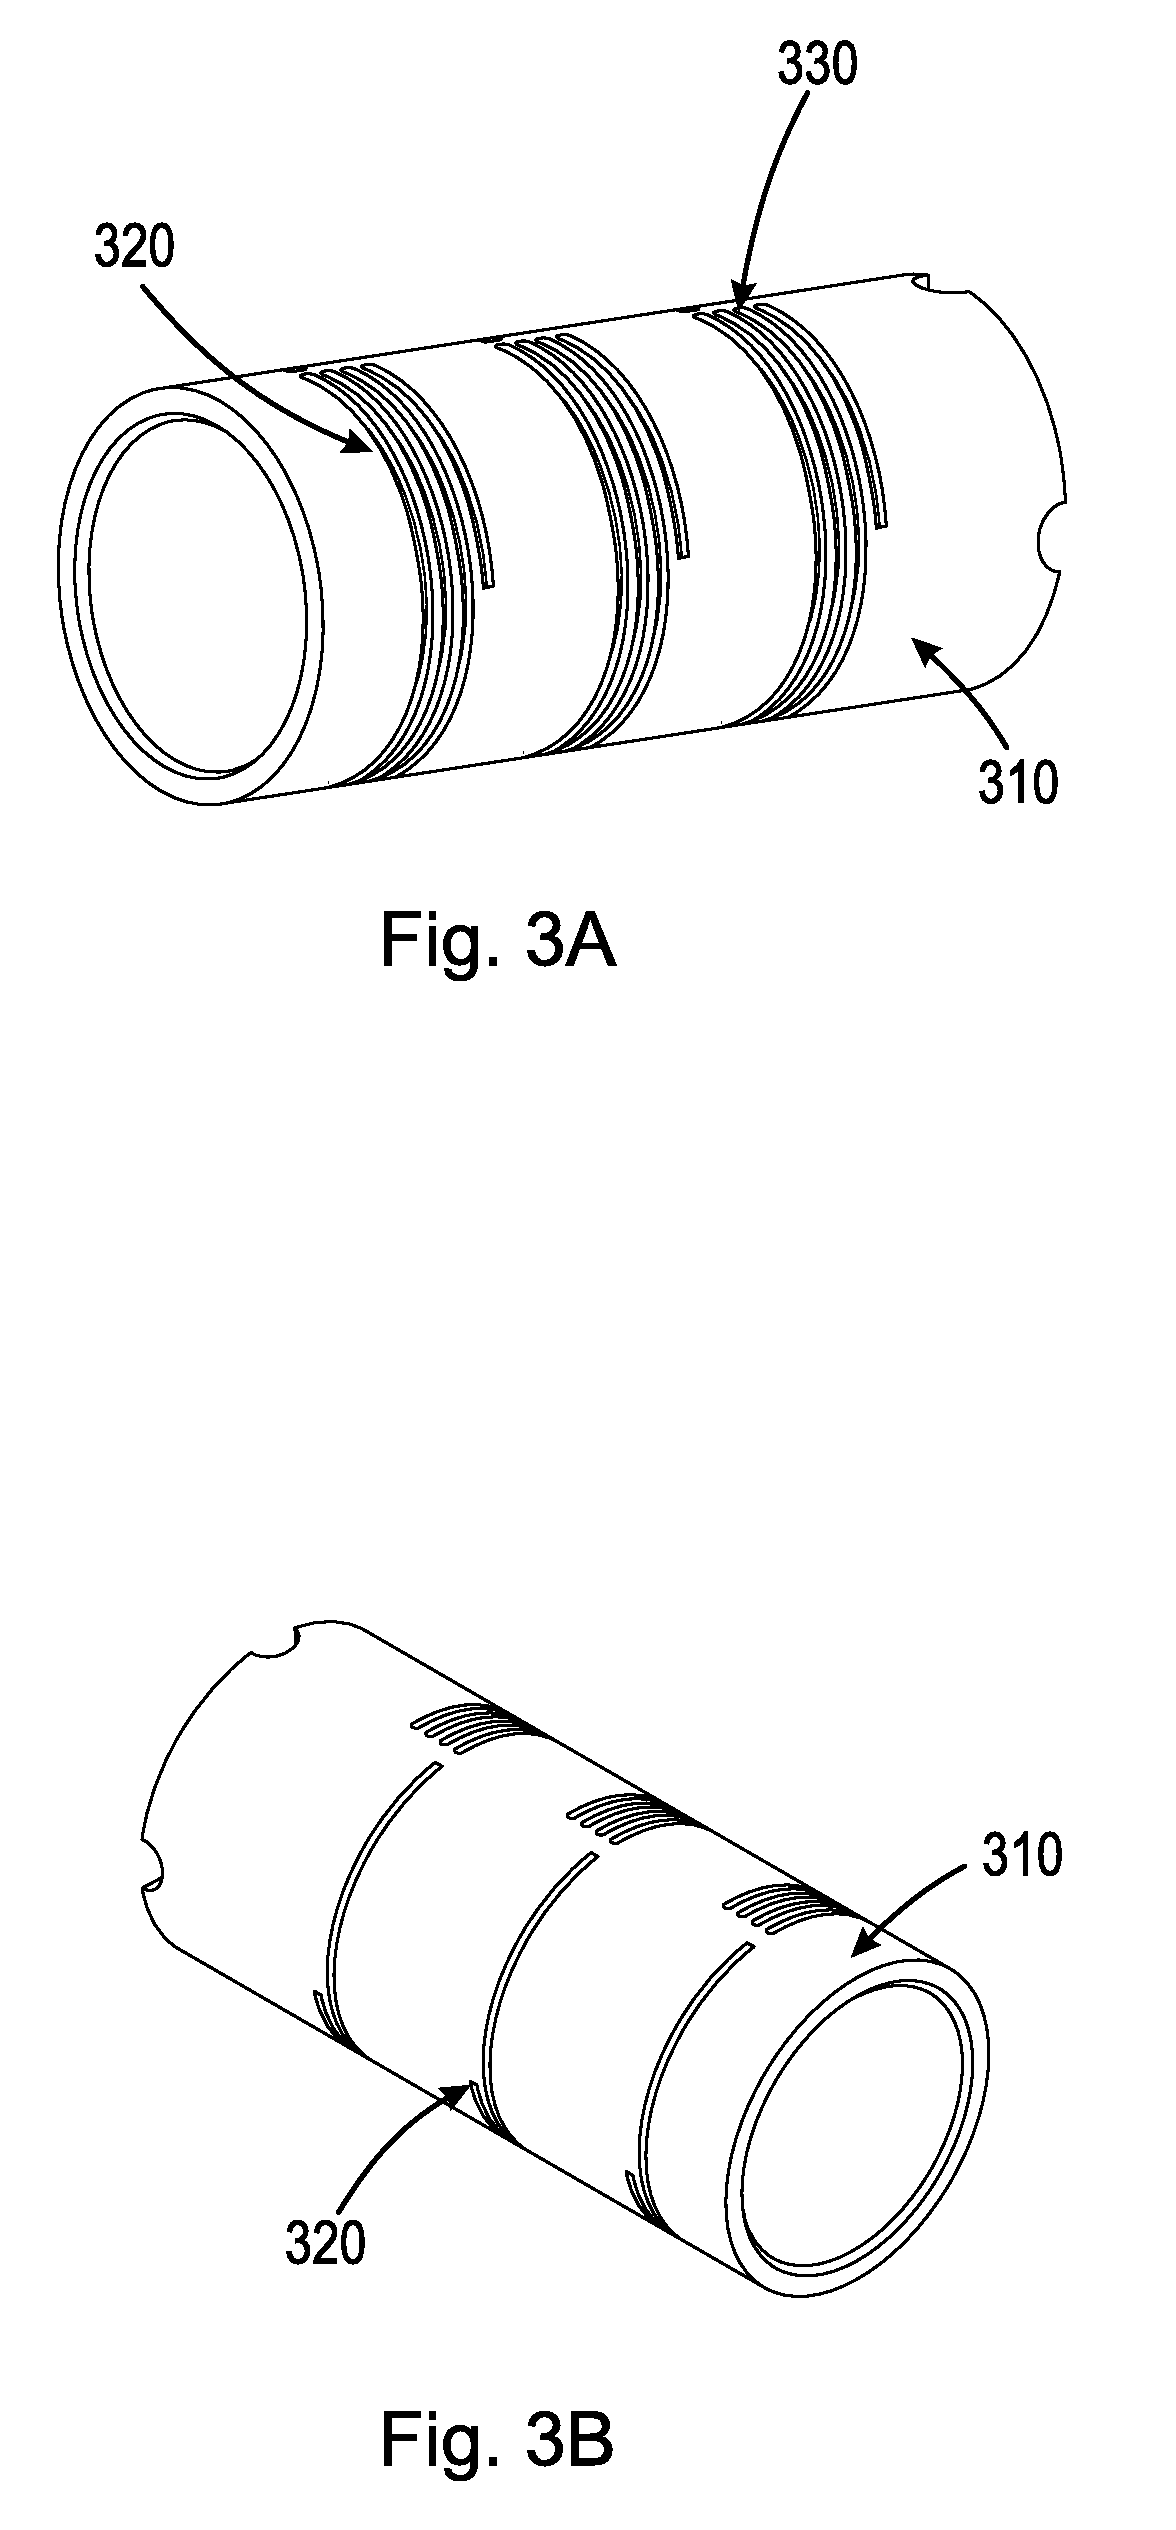 Shock absorber with variable damping profile